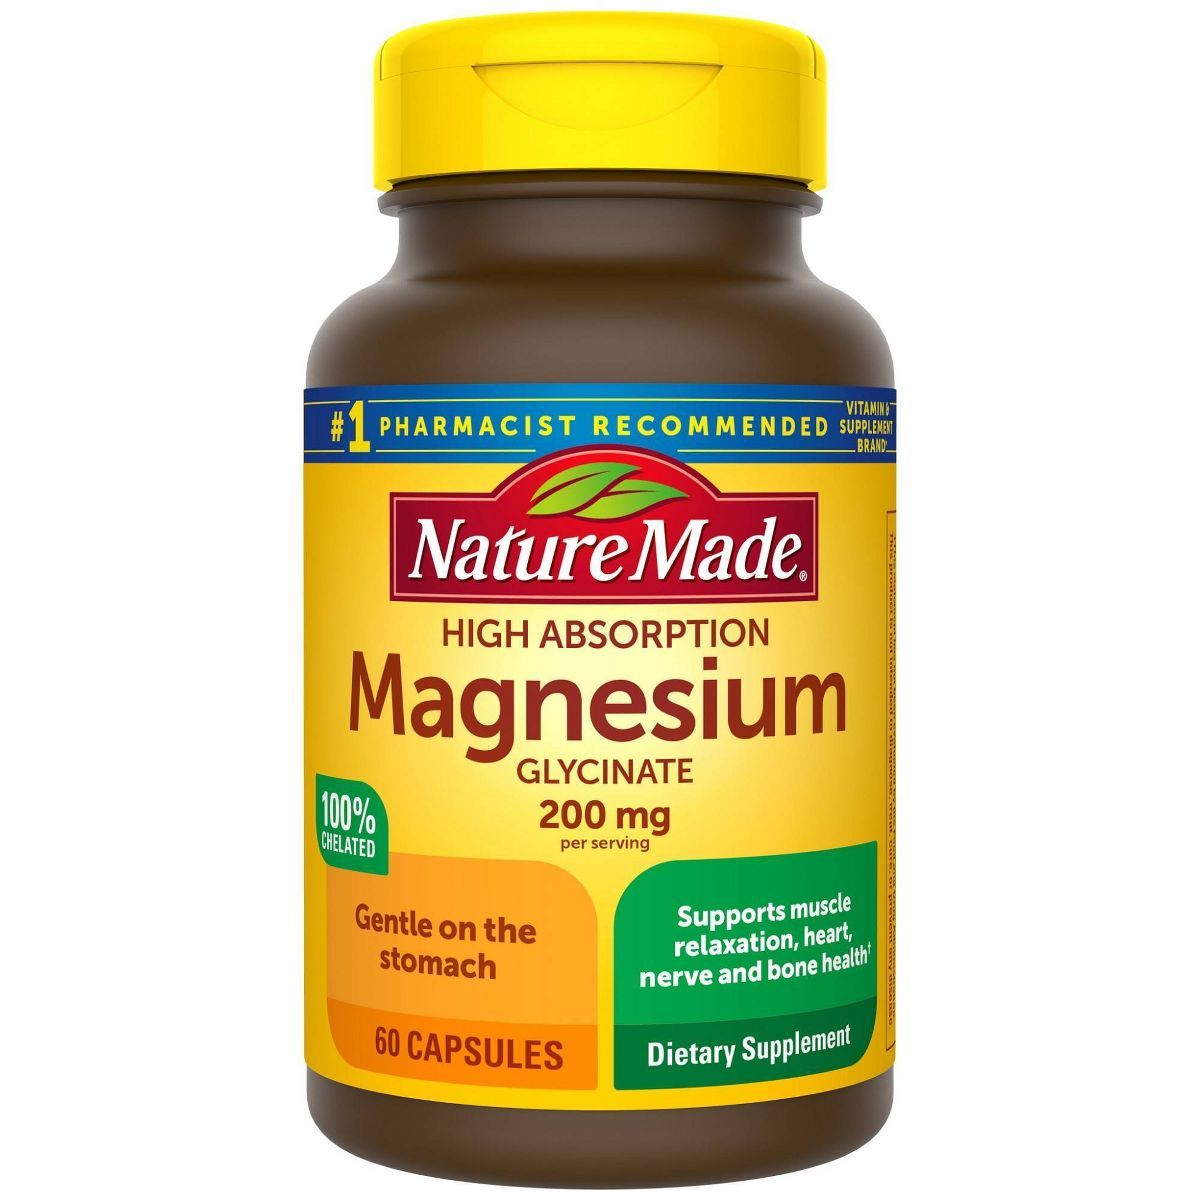 Nature Made High Absorption Magnesium Glycinate 200mg Supplement Capsules - 60ct | Target